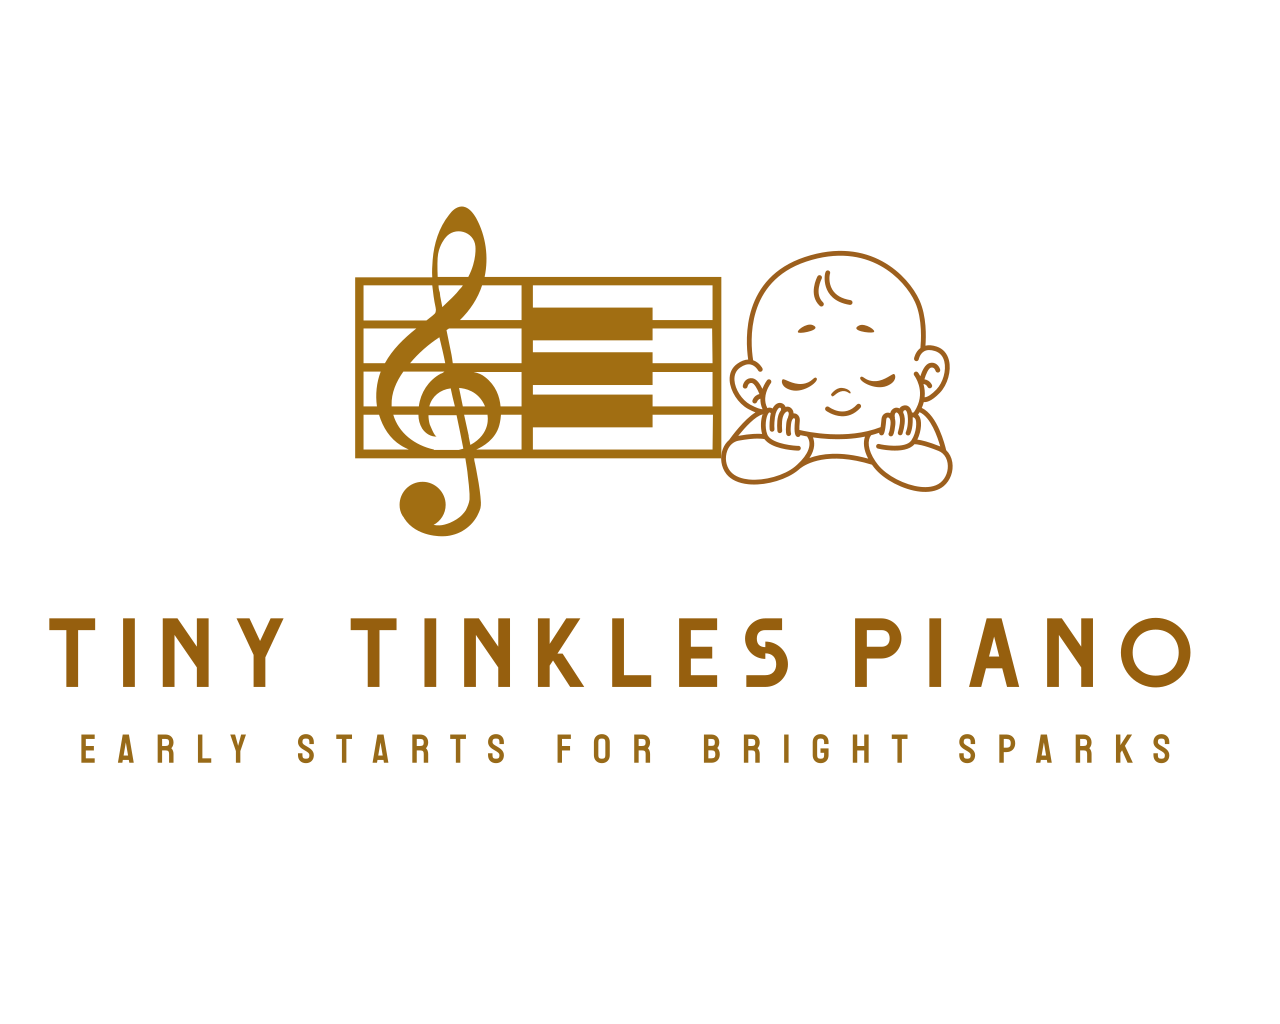 Tiny Tinkles Piano @The Music Boutique's logo